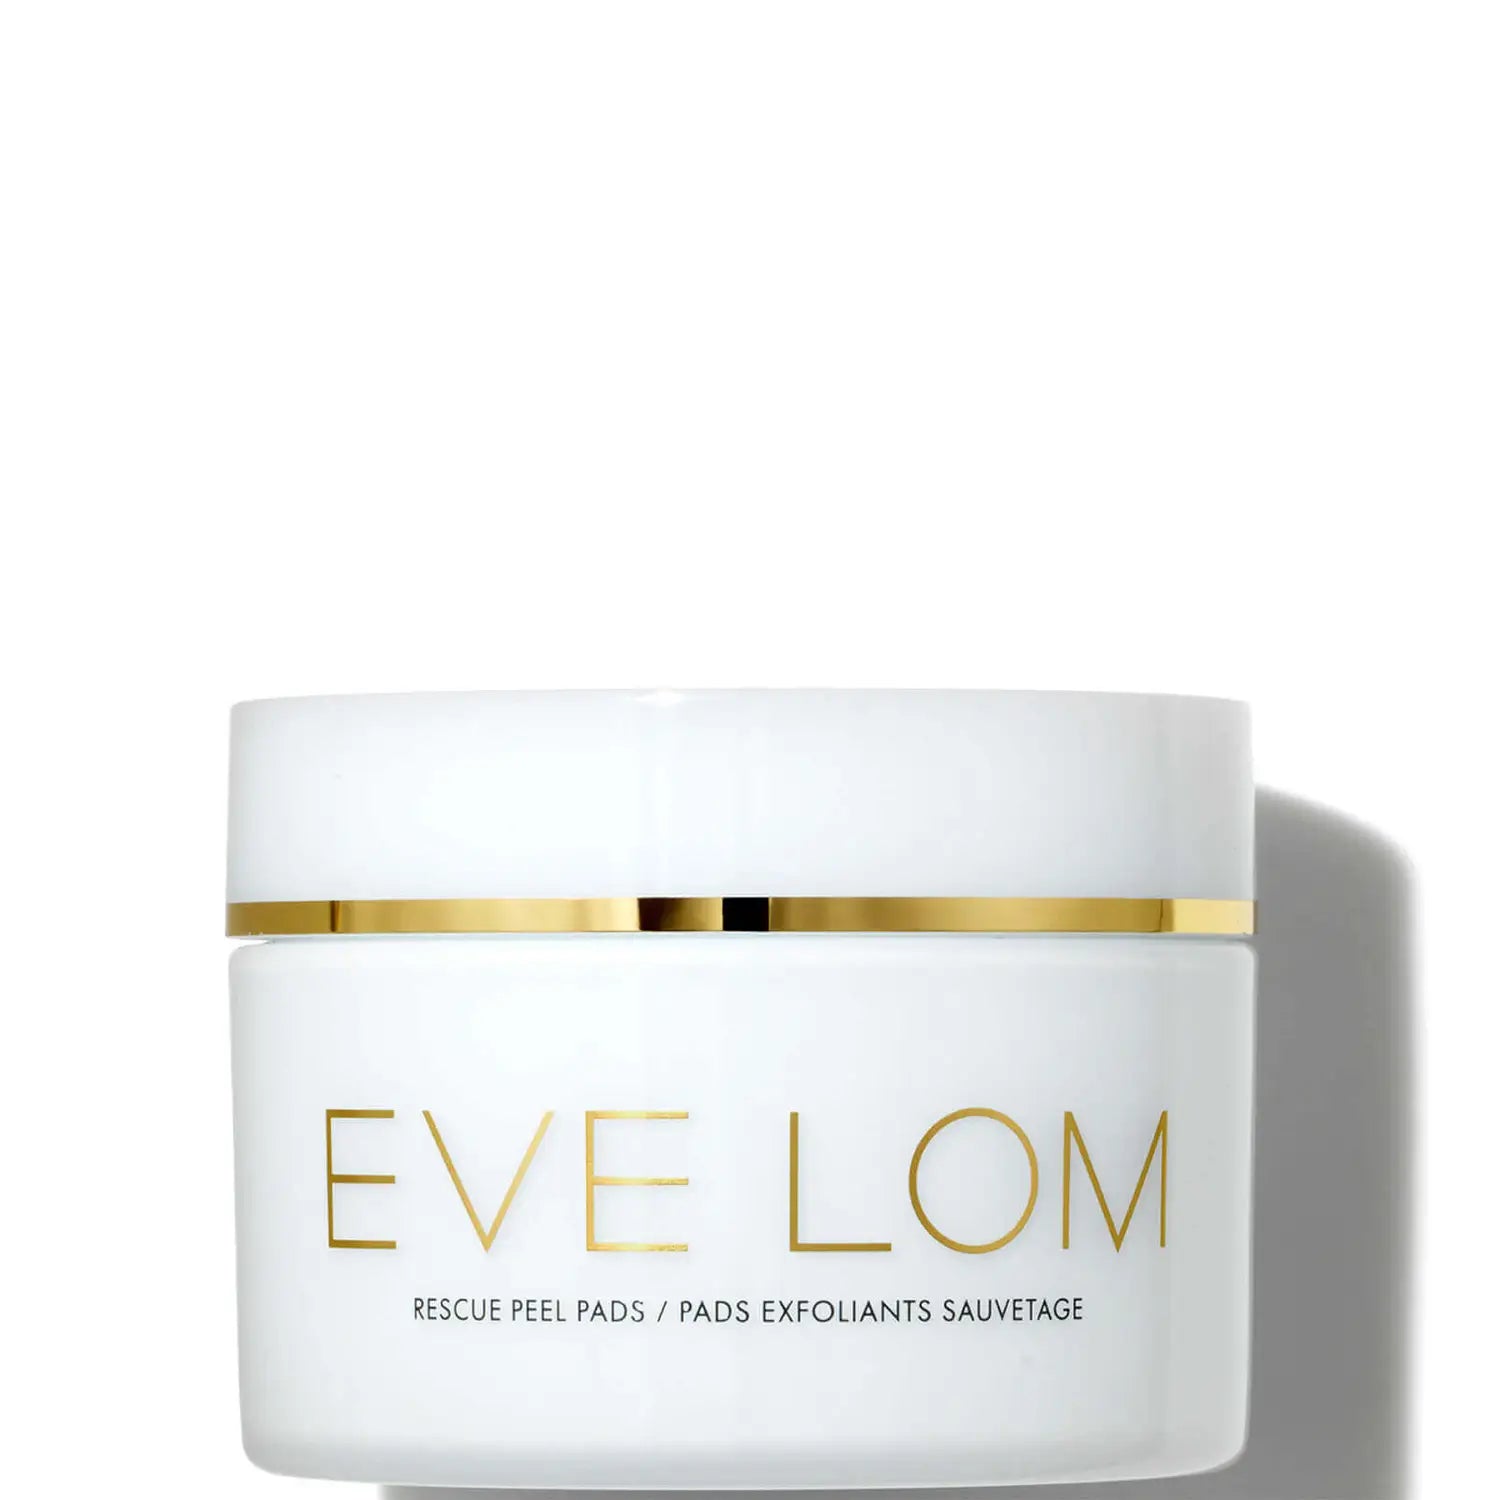 White container with gold text showcasing Eve Lom Rescue Peel Pads (60 Pads), an exfoliating and resurfacing treatment. The pads gently buff away dead skin, revealing a smoother, brighter, and revitalized complexion. Formulated with BHA, PHA, and AHA acids, including Glycolic Acid, the pads encourage fresher and healthier-looking skin. The Multi-Fruit Acid Complex, along with Lactic Acid, hydrates and conditions the skin, while Salicylic Acid, Marshmallow, and Vitamin B3 soothe and calm irritation. The pads